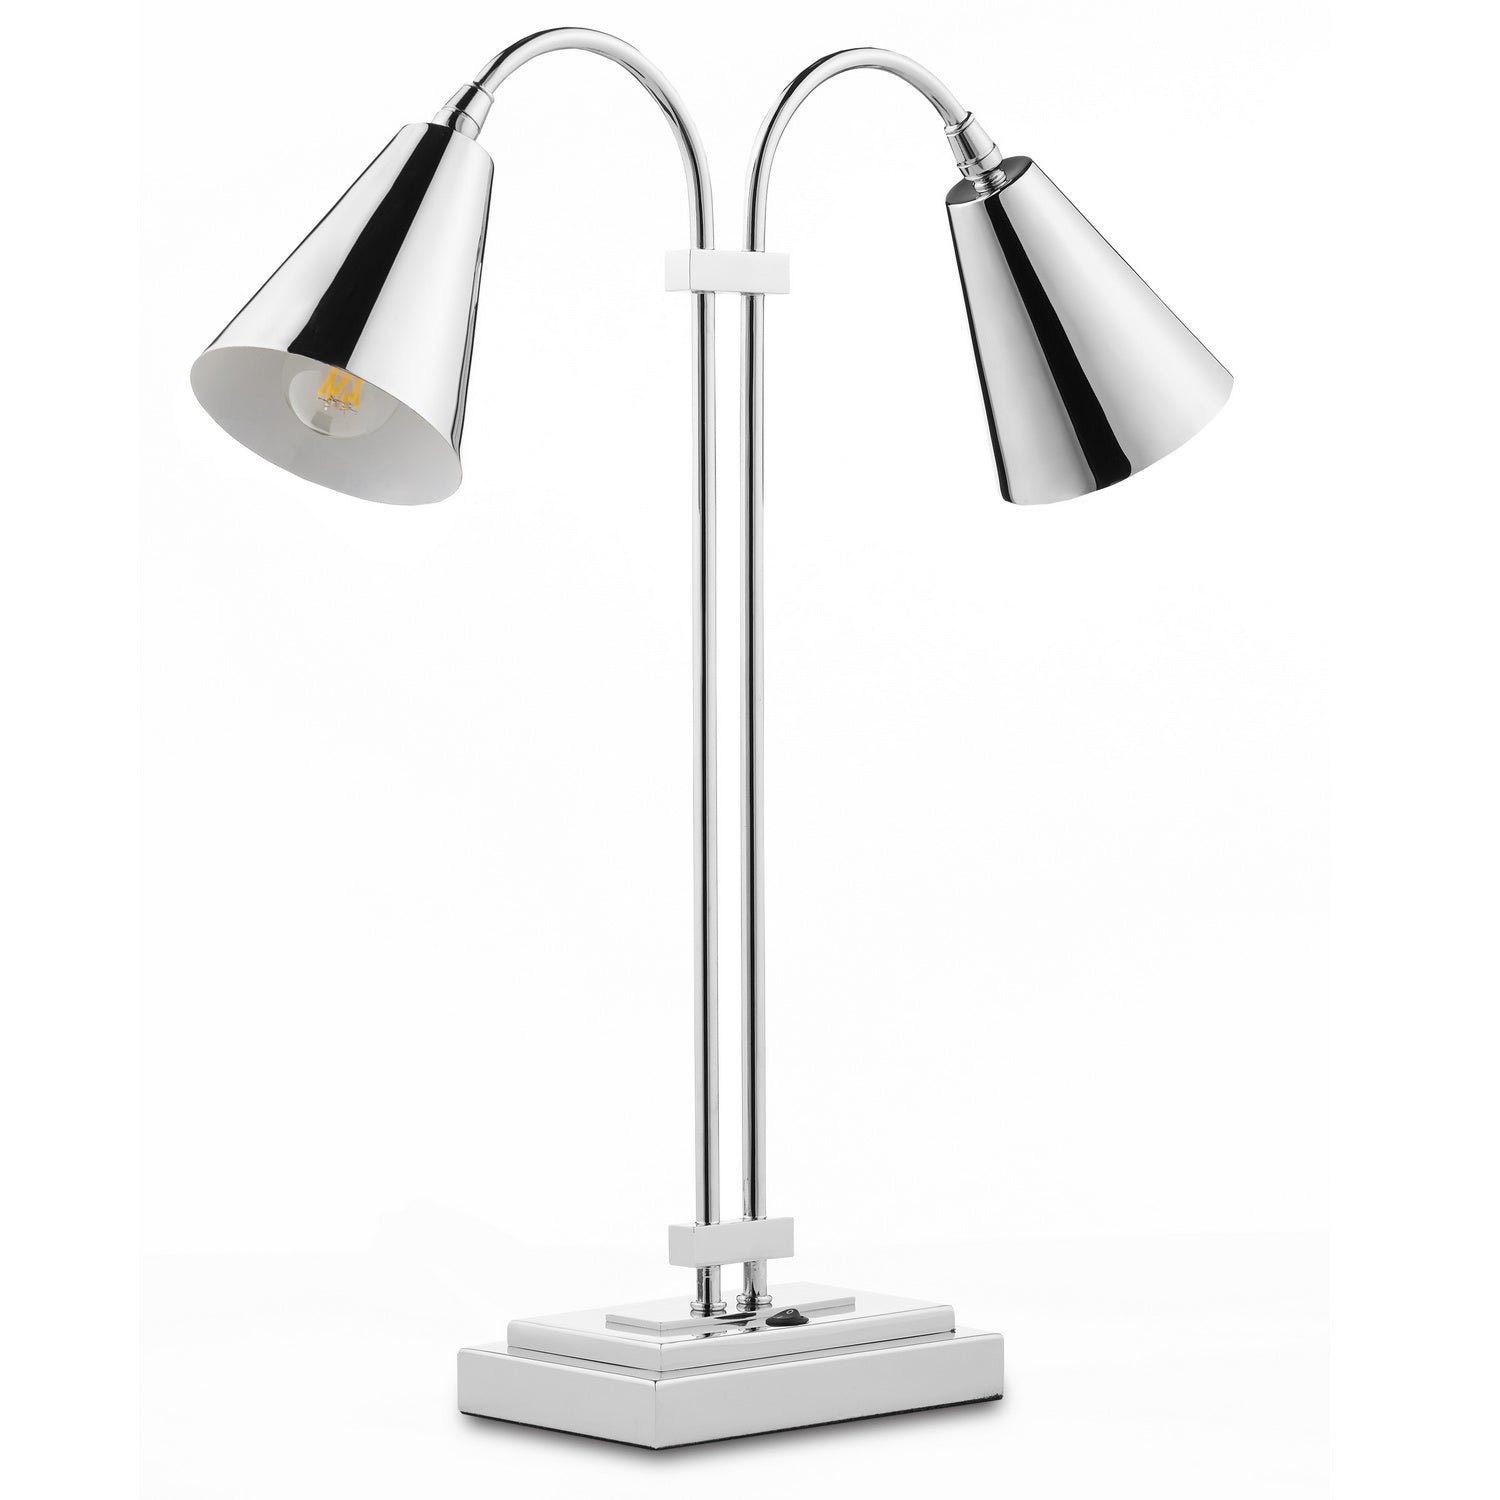 Two Light Desk Lamp from the Symmetry collection in Polished Nickel finish